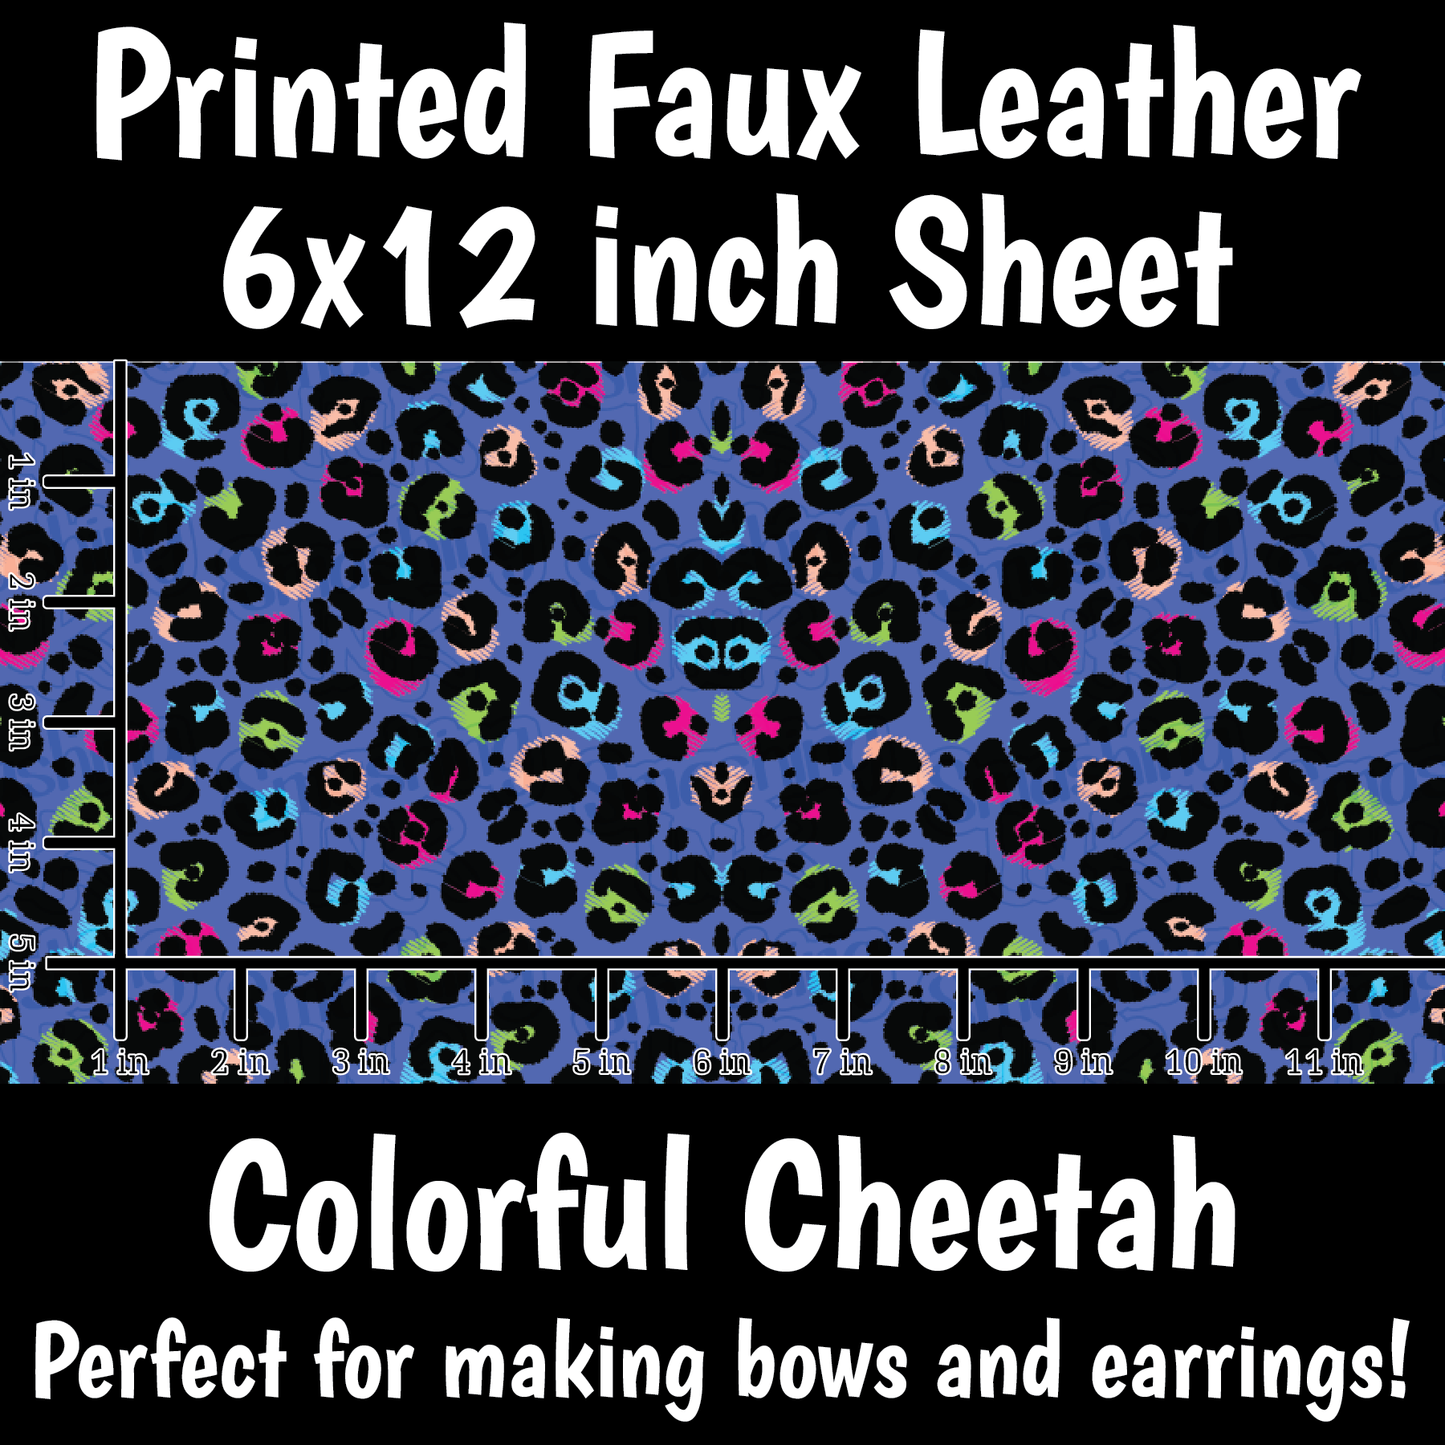 Colorful Cheetah - Faux Leather Sheet (SHIPS IN 3 BUS DAYS)